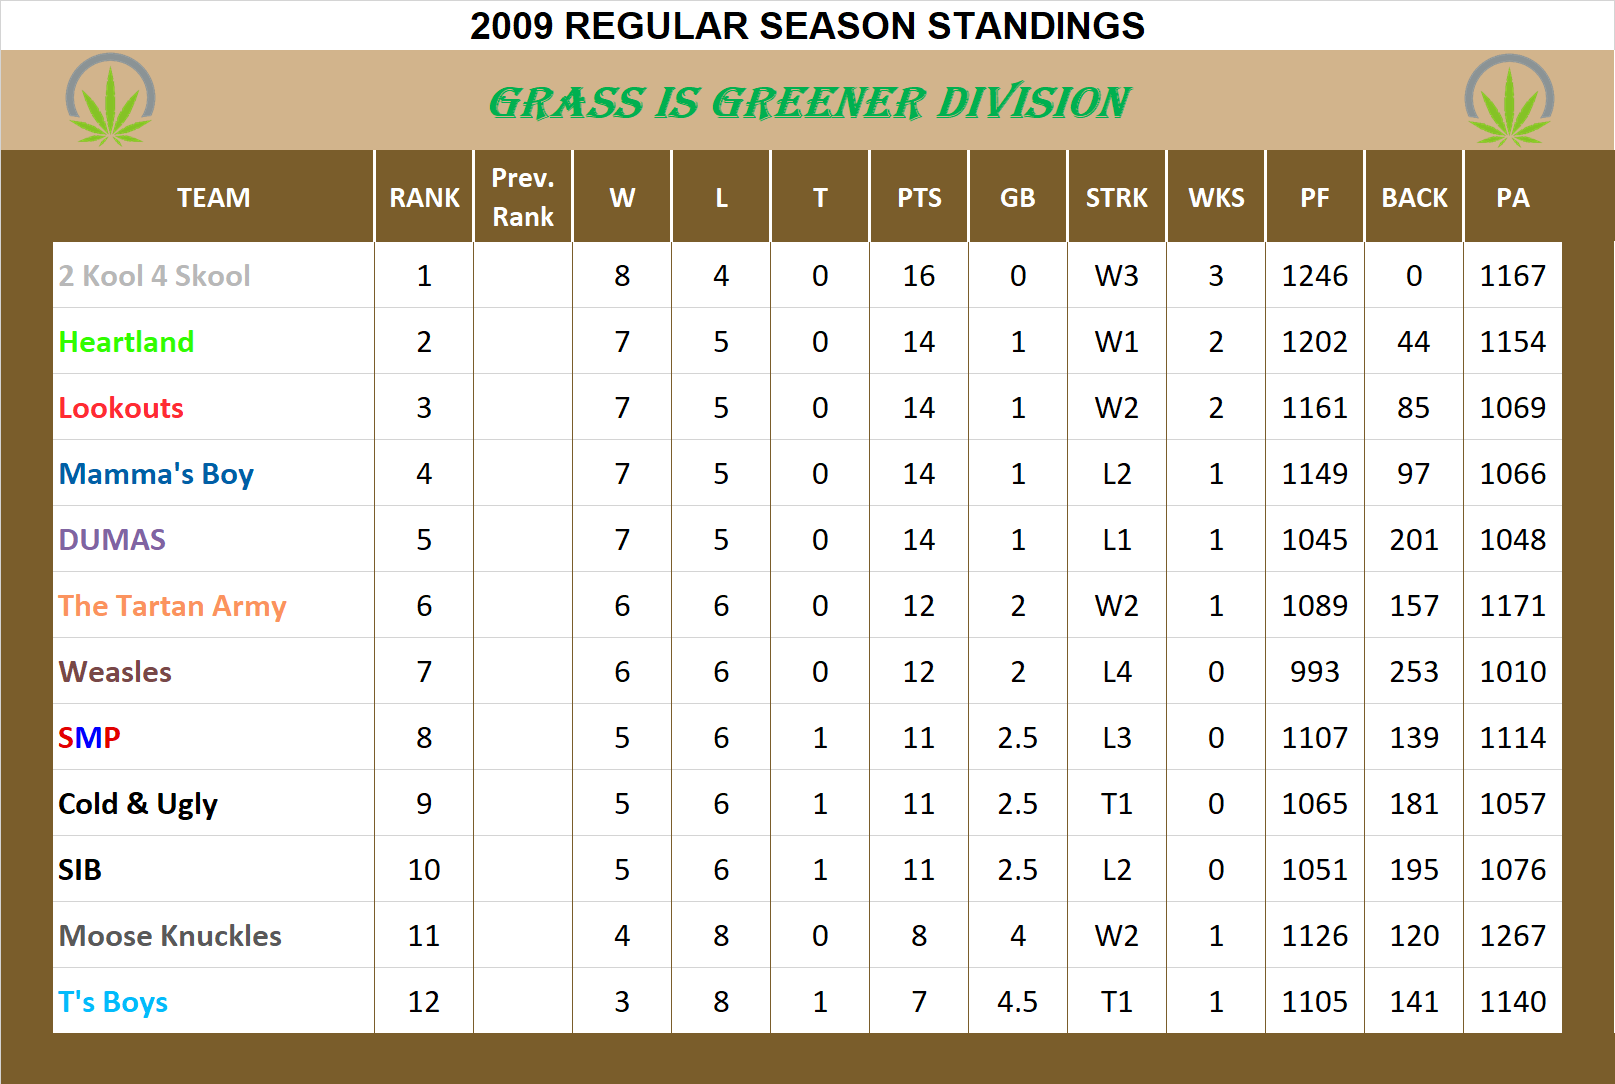 2009 Grass is Greener Division Standings